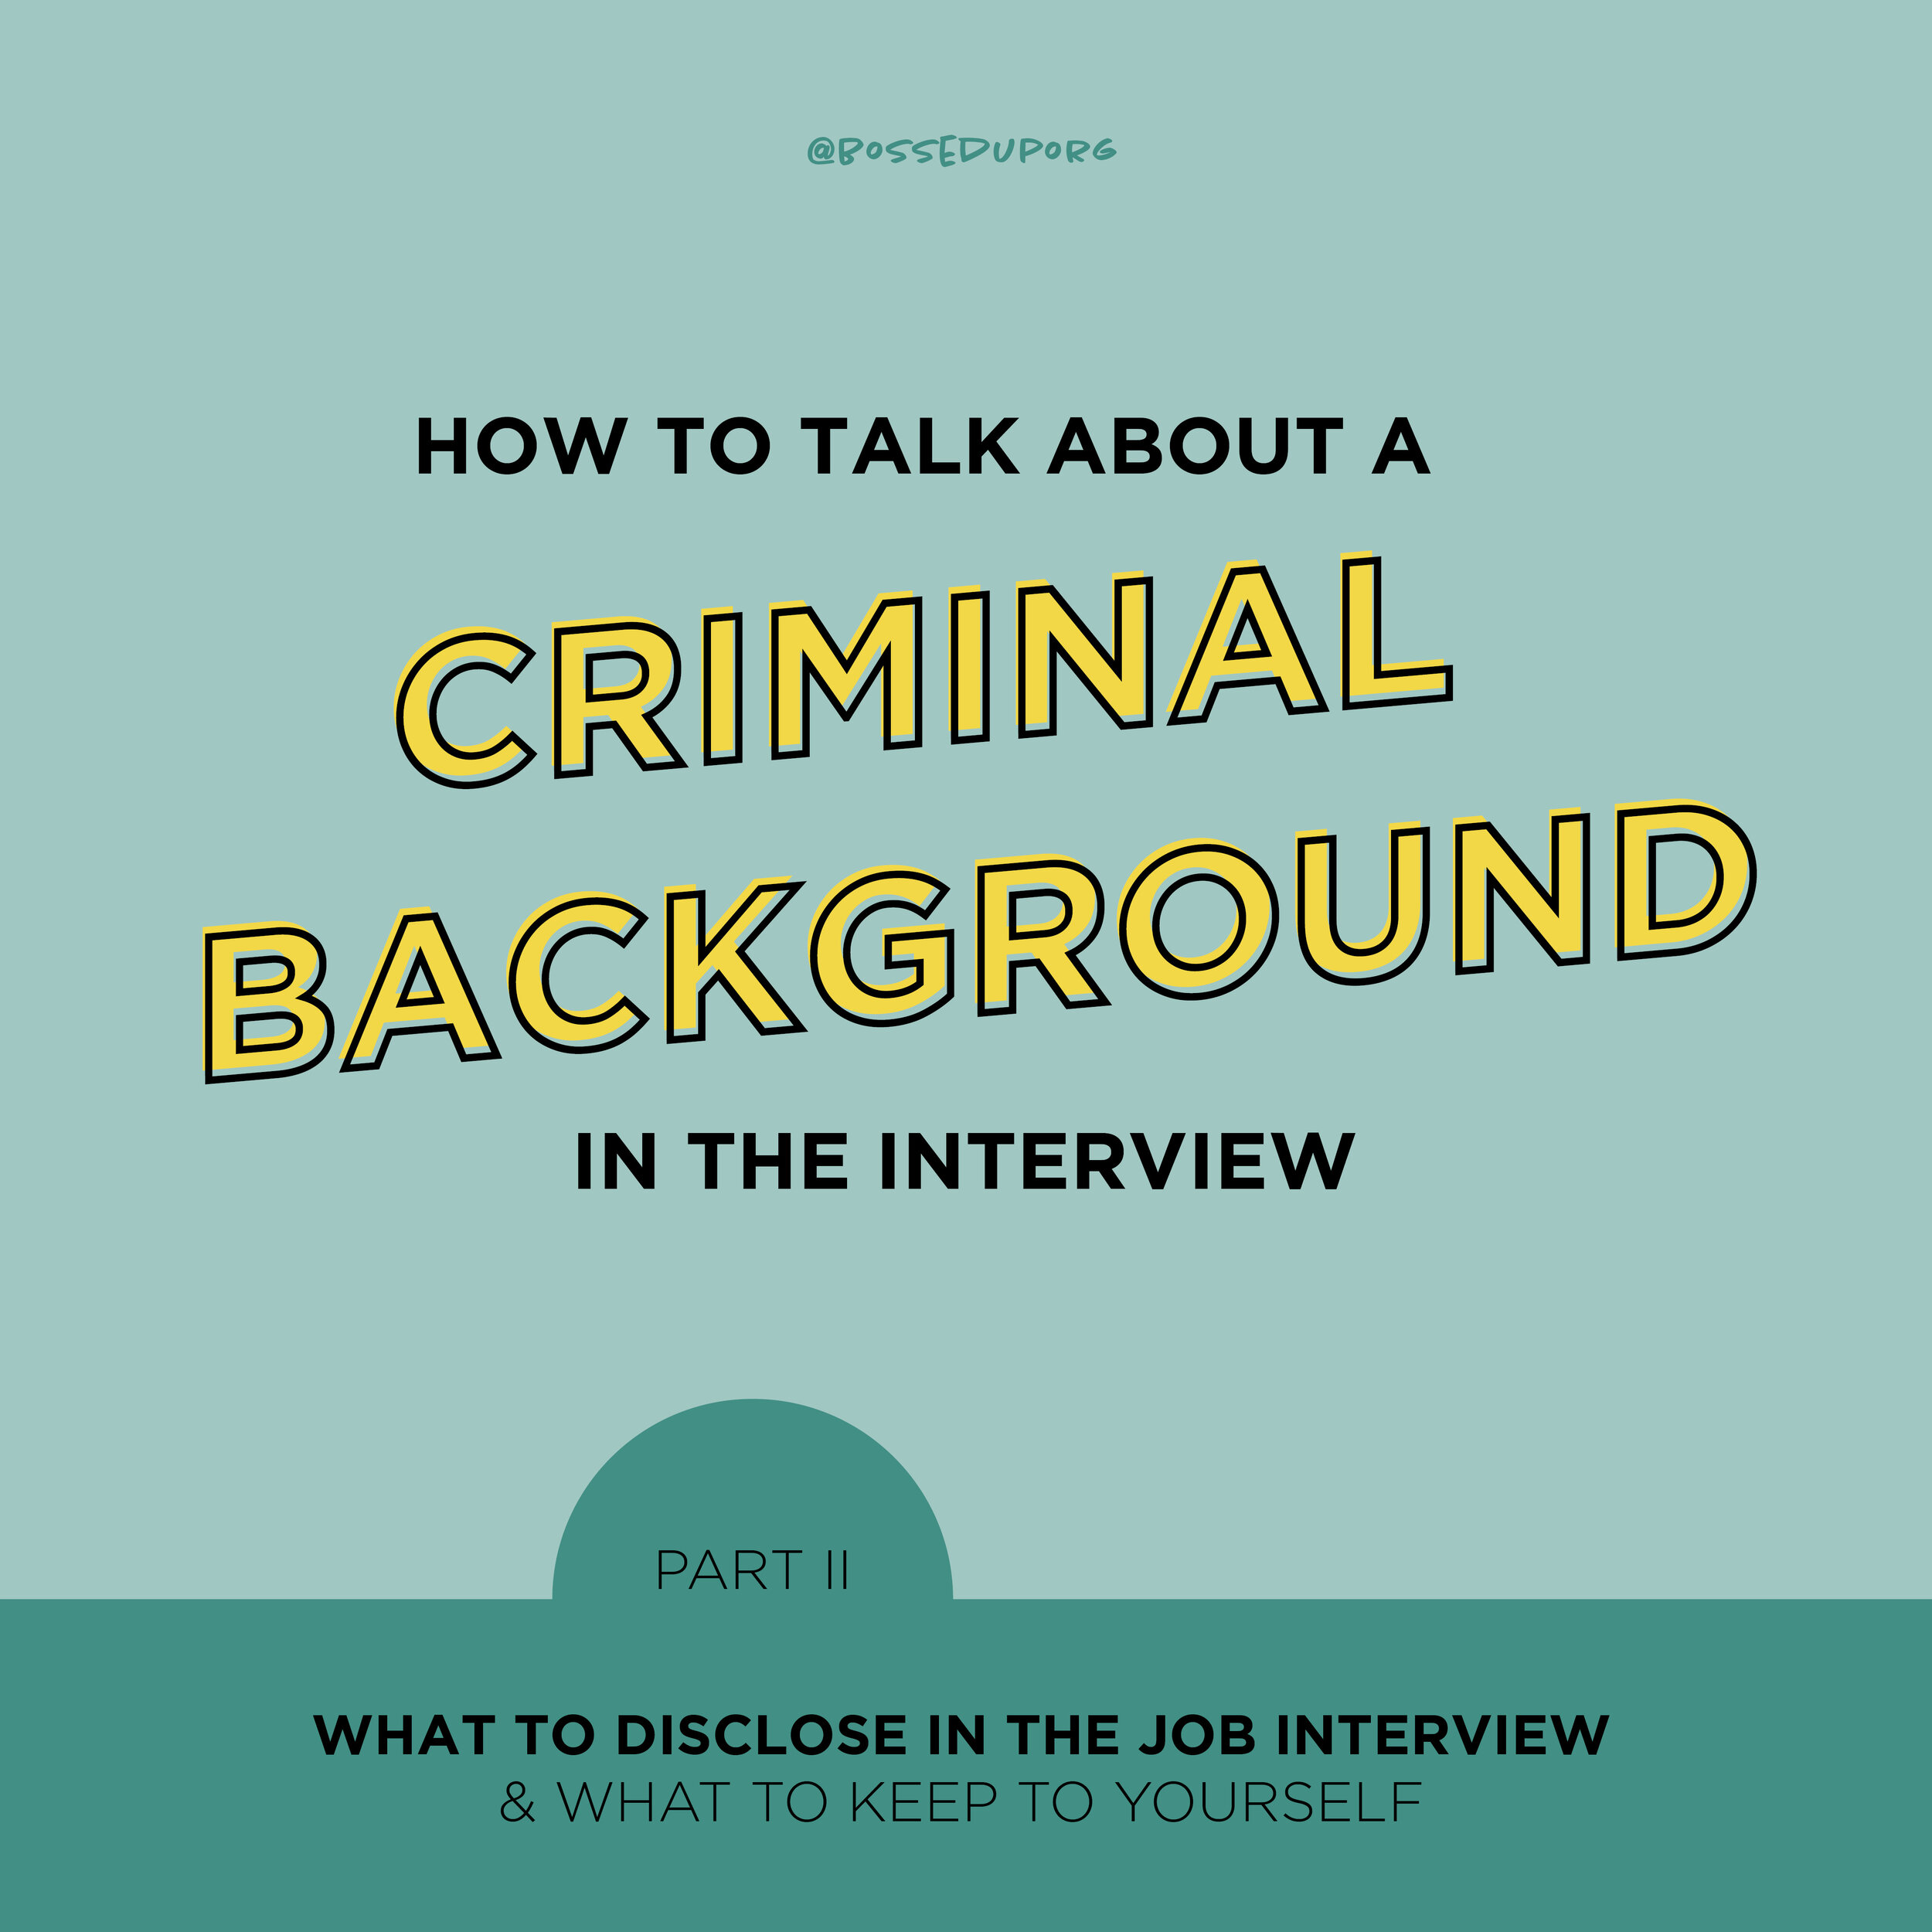 How to Talk About a Criminal Background in the Job Interview — BOSSED UP